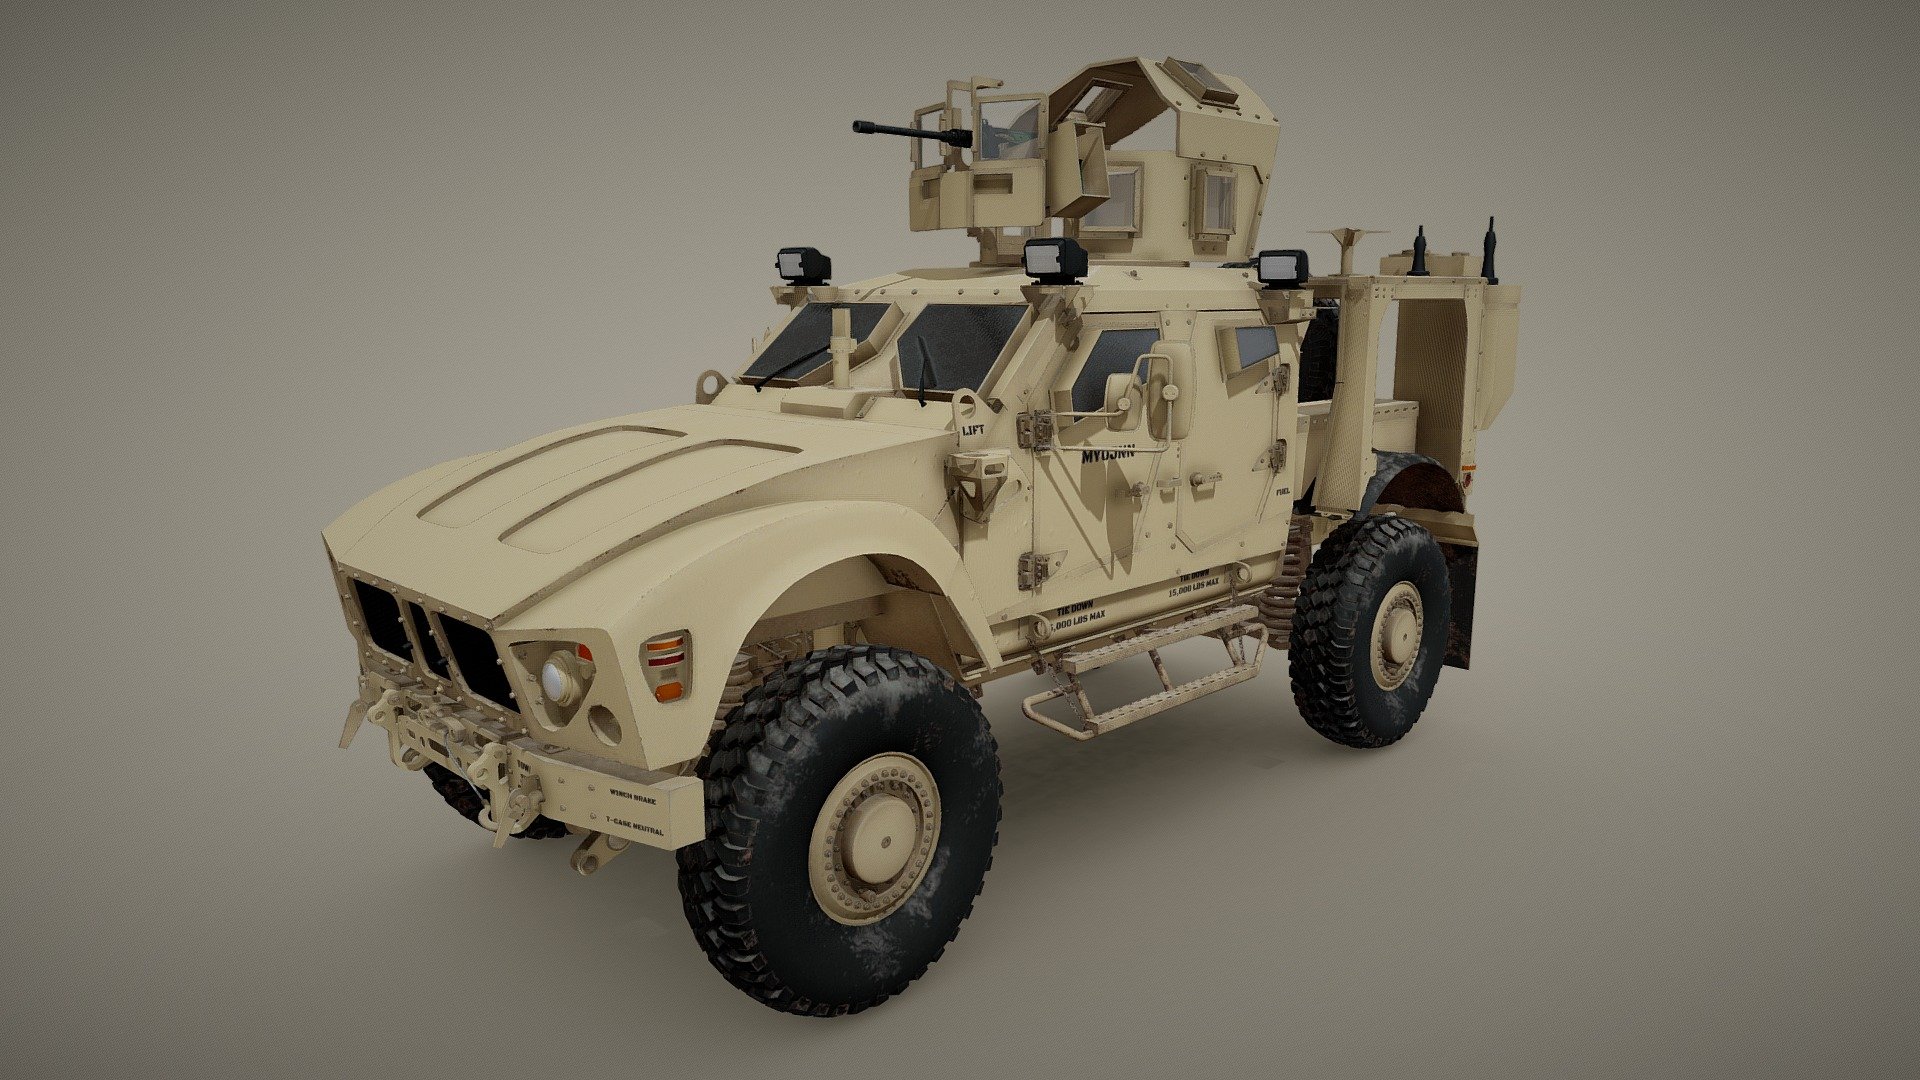 The Oshkosh M-ATV is a Mine-Resistant Ambush Protected (MRAP) vehicle developed by the Oshkosh Corporation for the MRAP All Terrain Vehicle (M-ATV) program. Intended to replace M1114 HMMWVs (Humvee), it is designed to provide the same levels of protection as the larger and heavier previous MRAPs, but with improved mobility 3d model